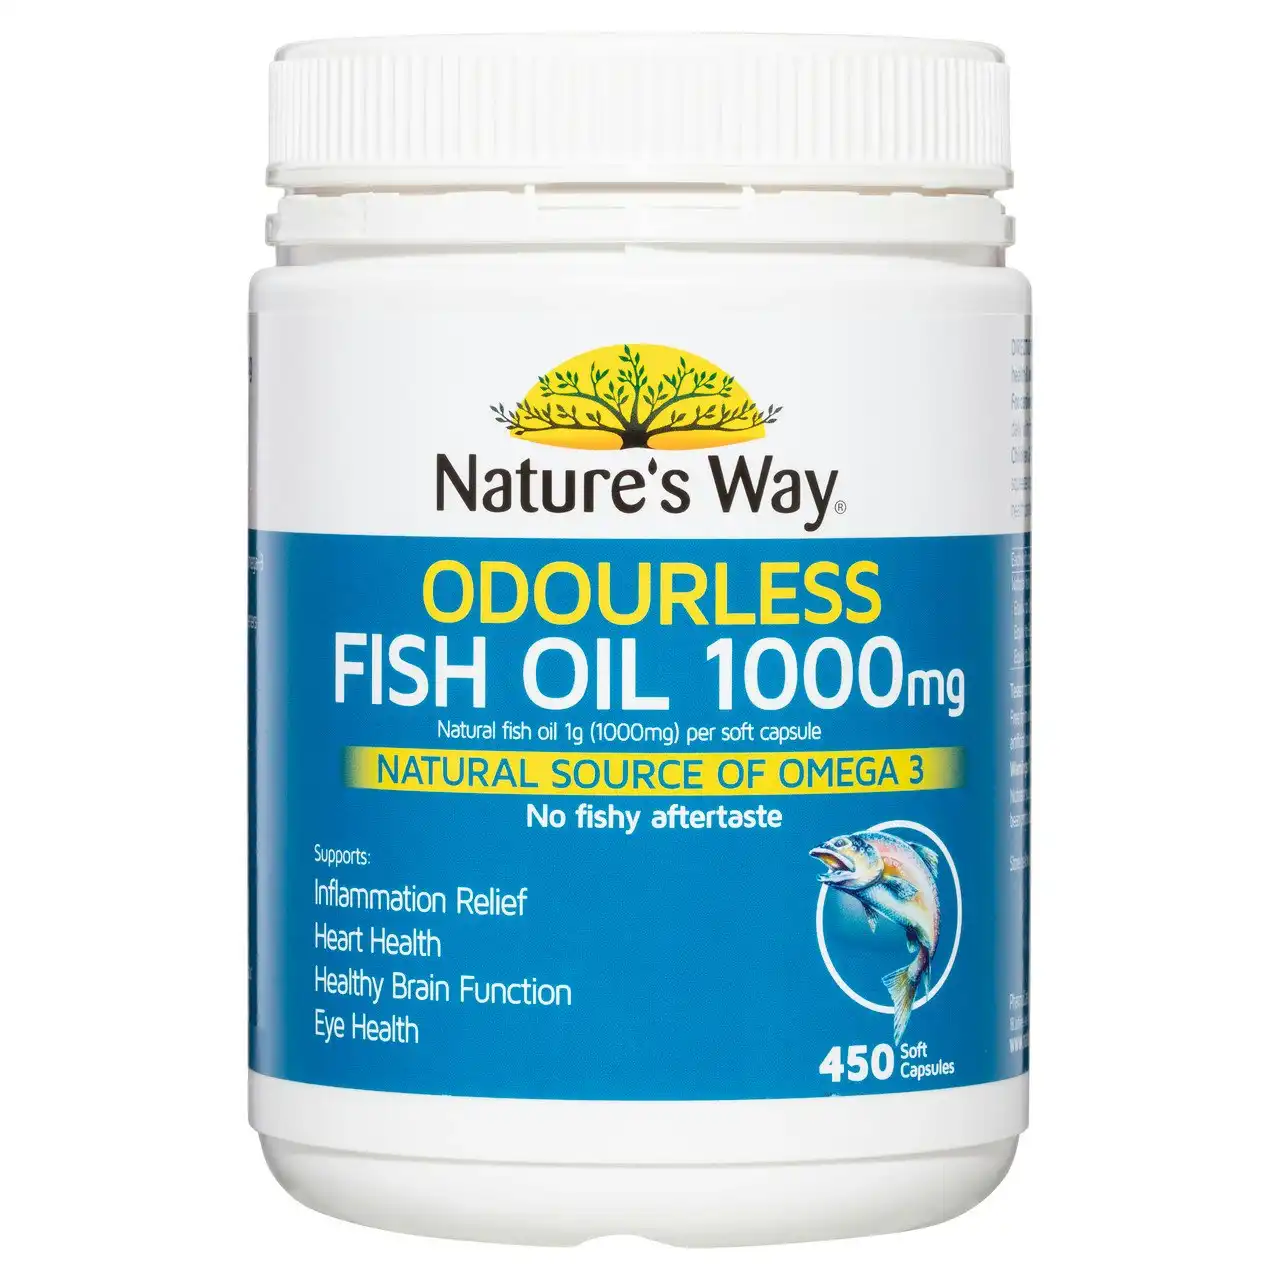 Nature's Way Odourless Fish Oil 1000mg 450 Capsules